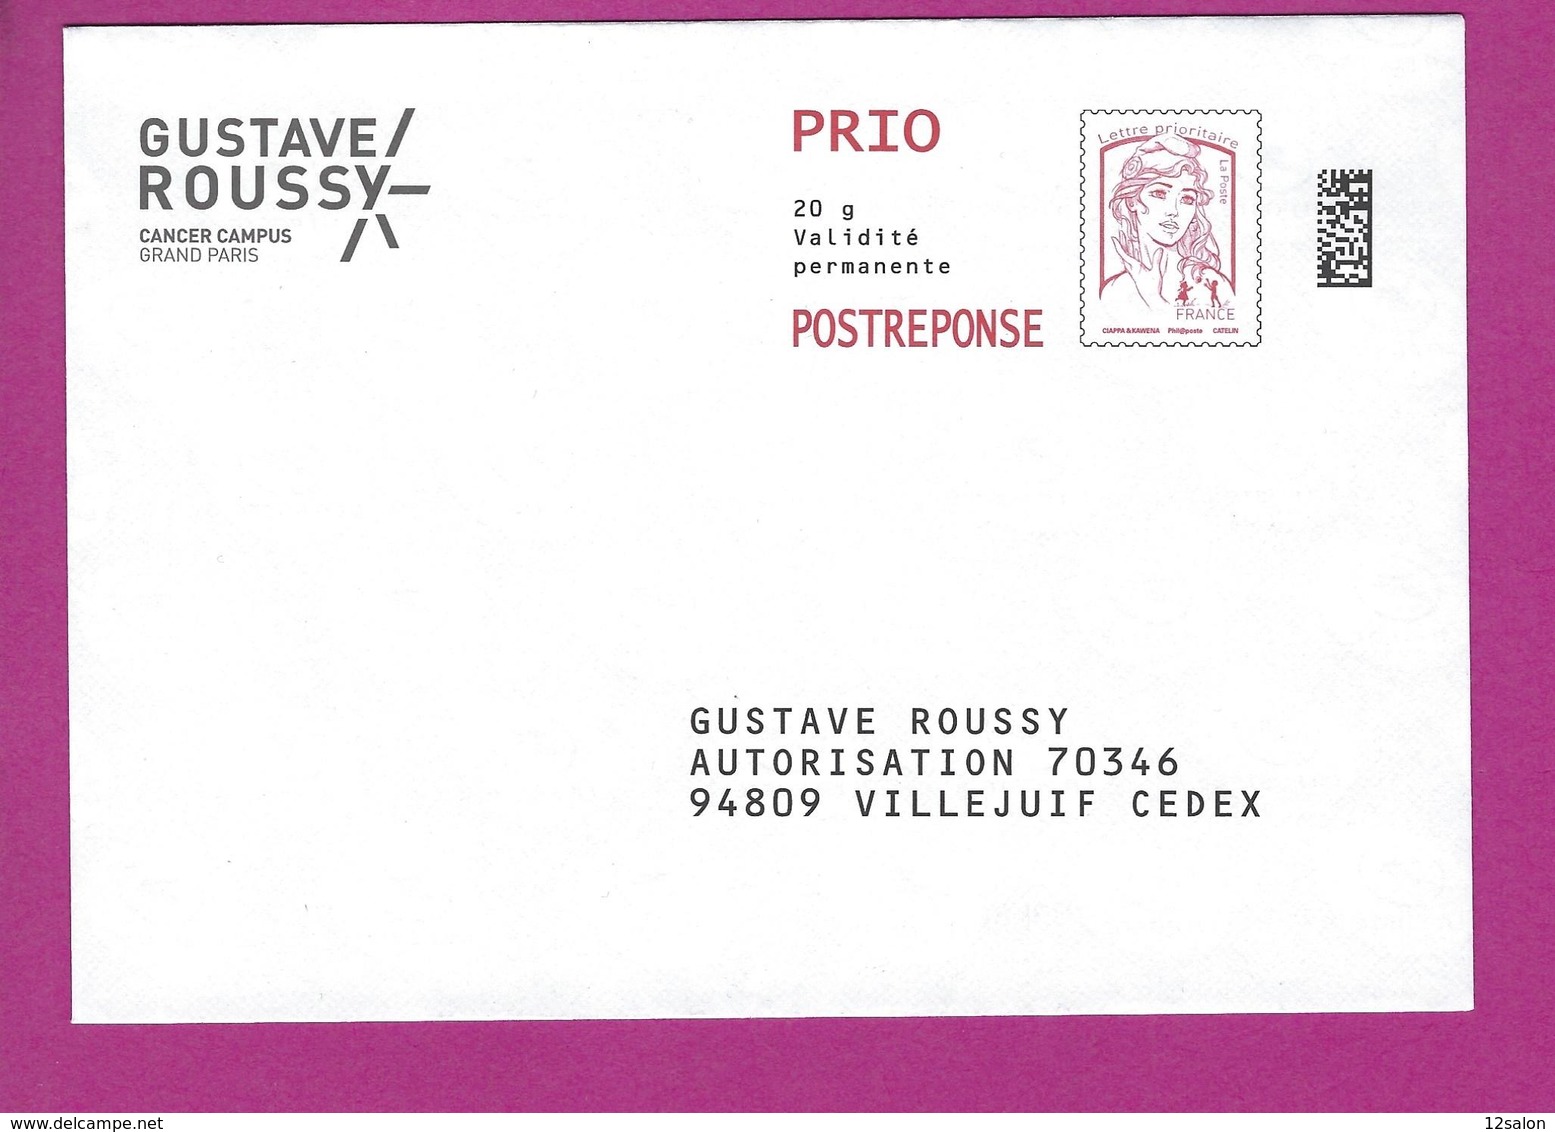 ENTIERS POSTAUX PRET A POSTER REPONSE MARIANNE CIAPPA GUSTAVE ROUSSY CANCER - Kaarten/Brieven Antwoorden T